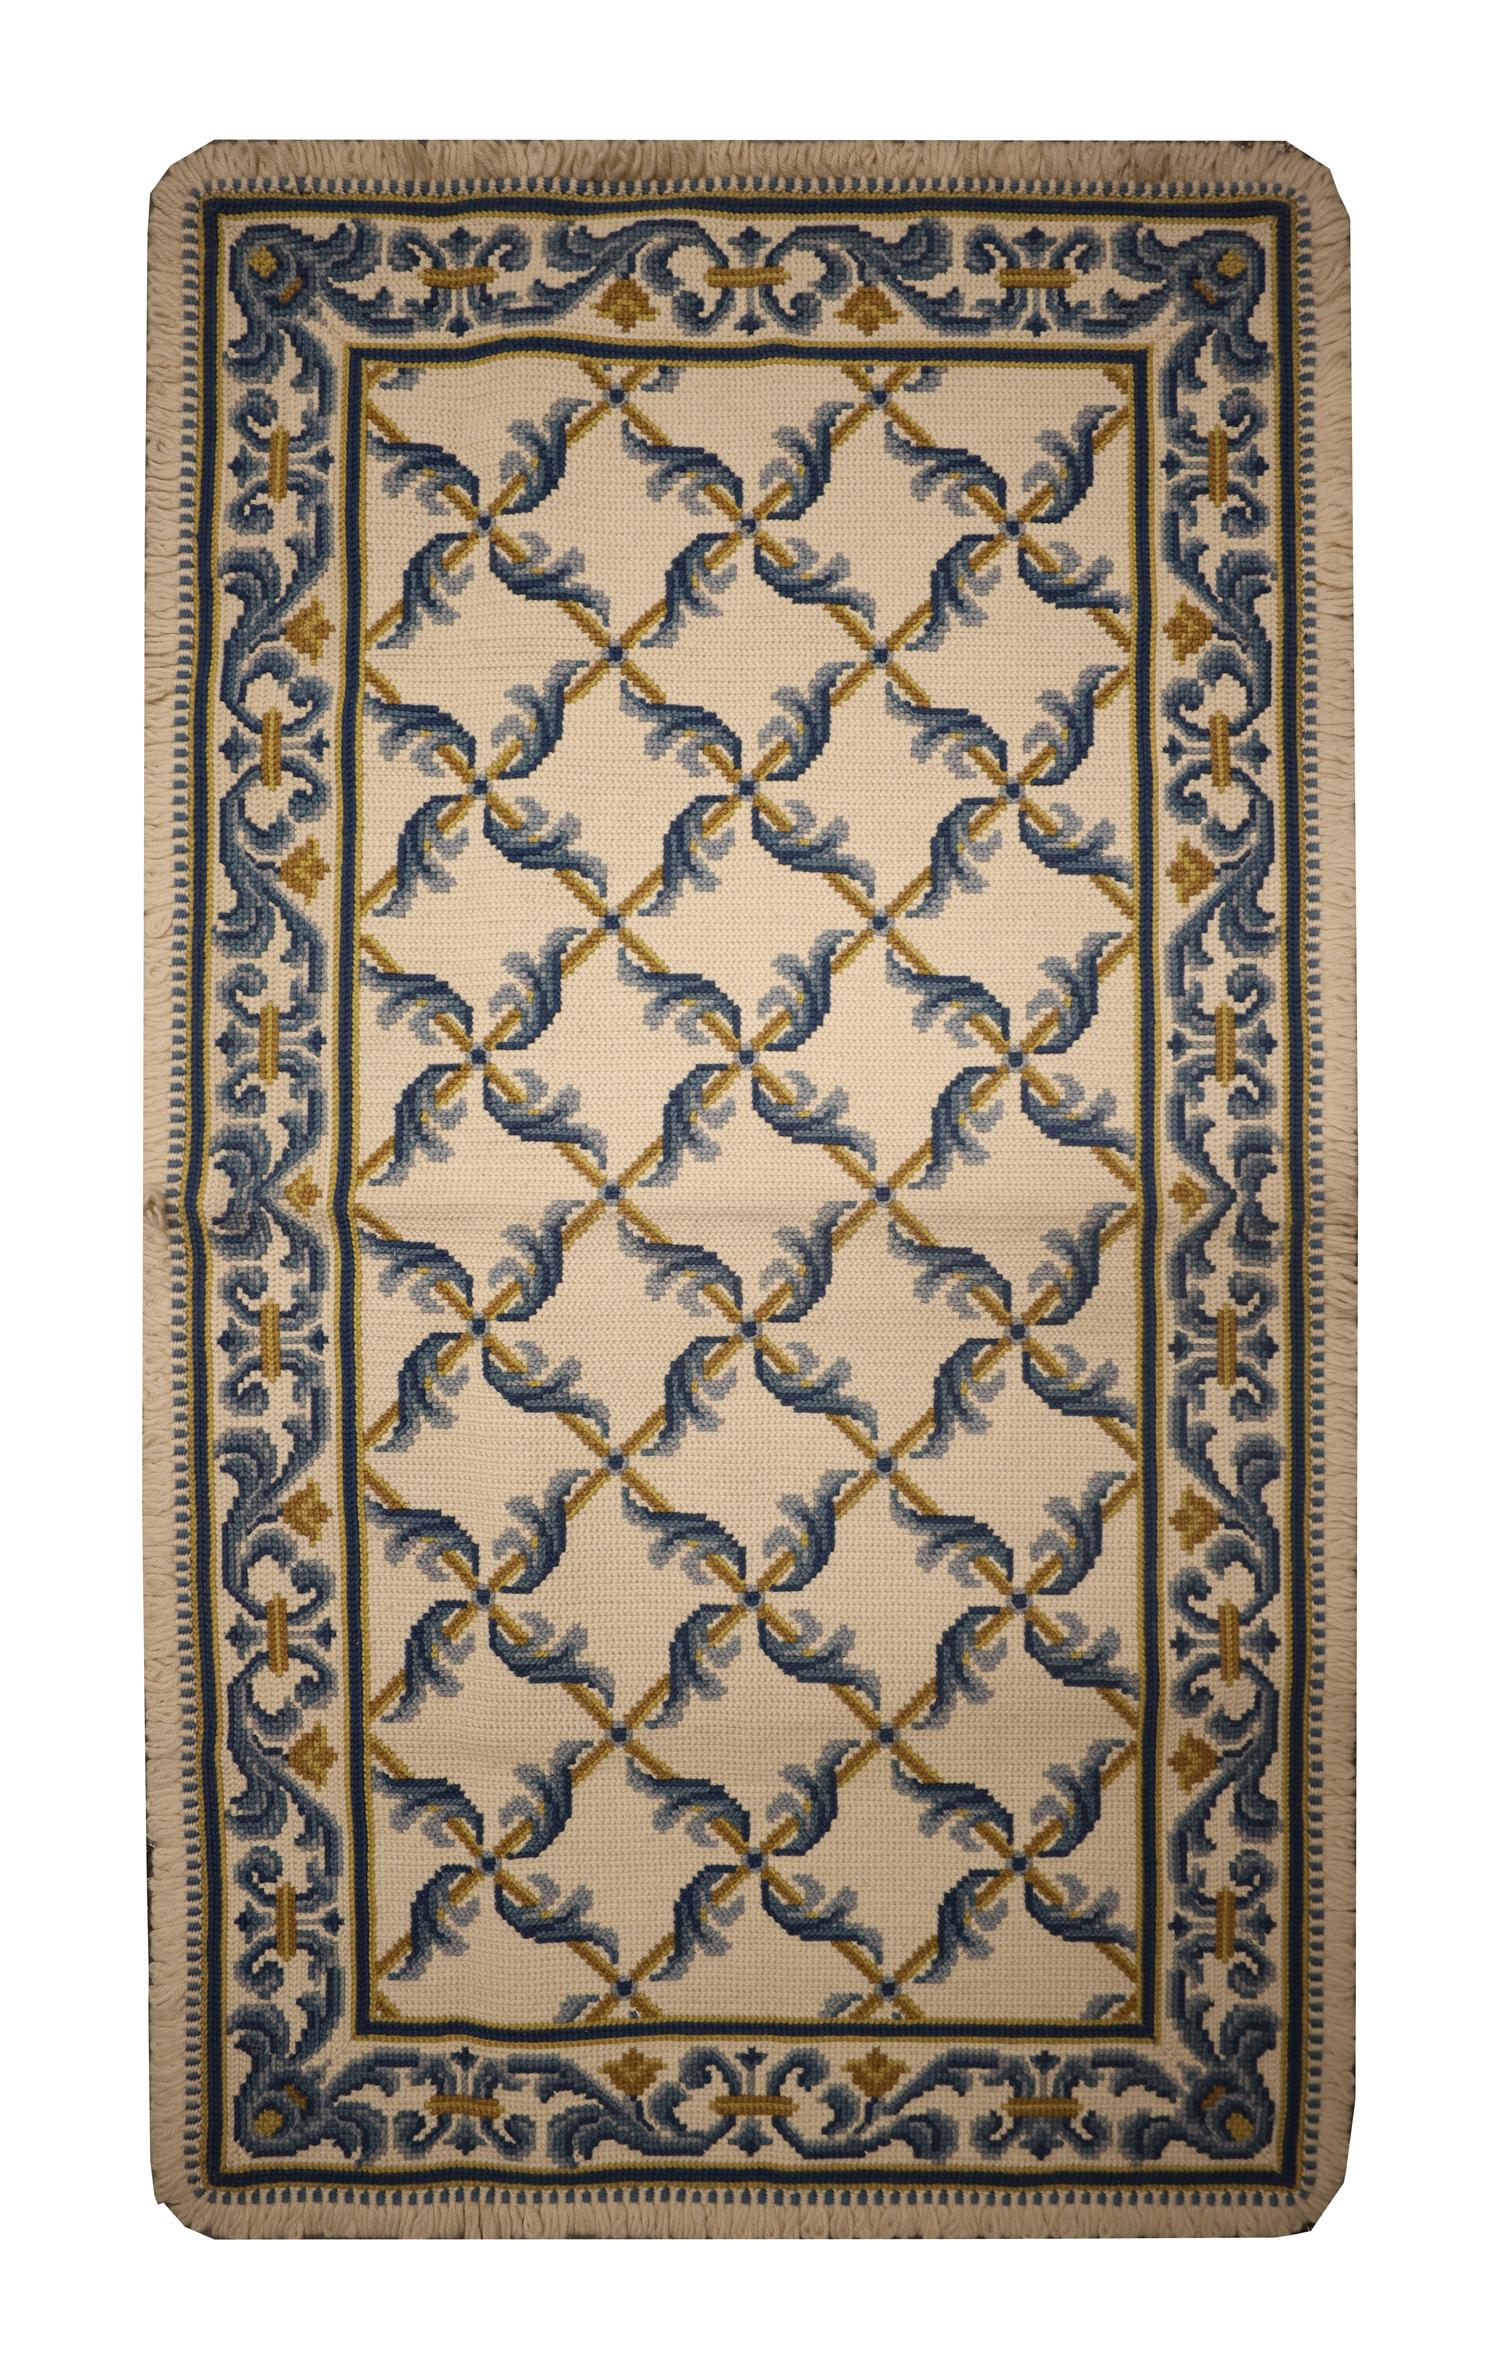 These elegant wool needlepoints are a classic example of a modern Portuguese style rug woven by hand in China in the early 21st century. The design in these pieces has been delicately woven with a symmetrical pattern made up of blue and mustard